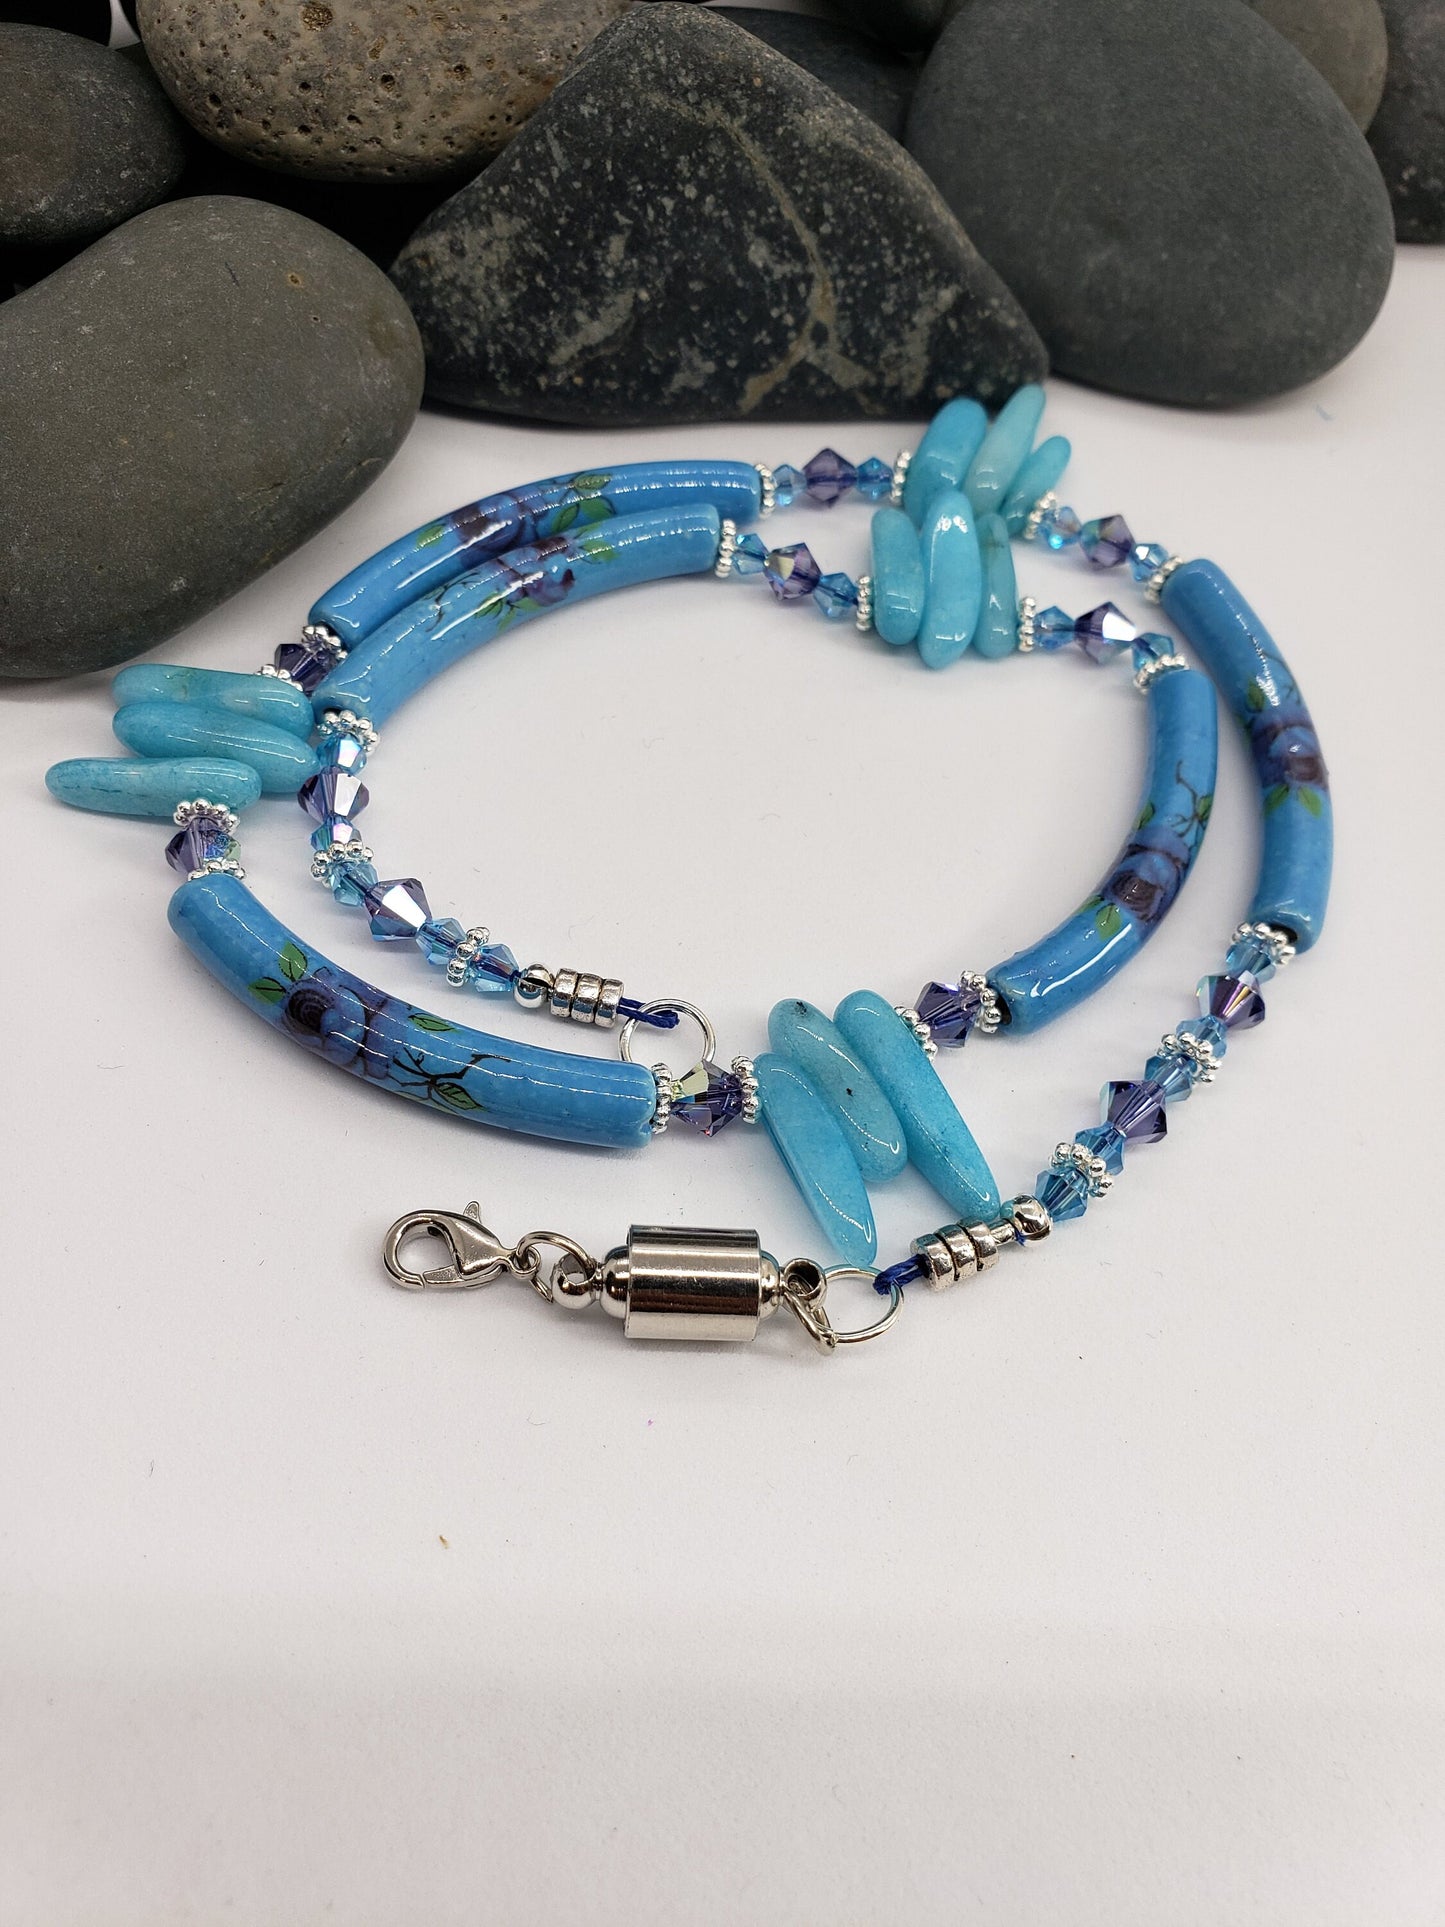 Porcelain Tube Necklace with Turquoise Magnesite Spike Stones and Swarovski Crystals